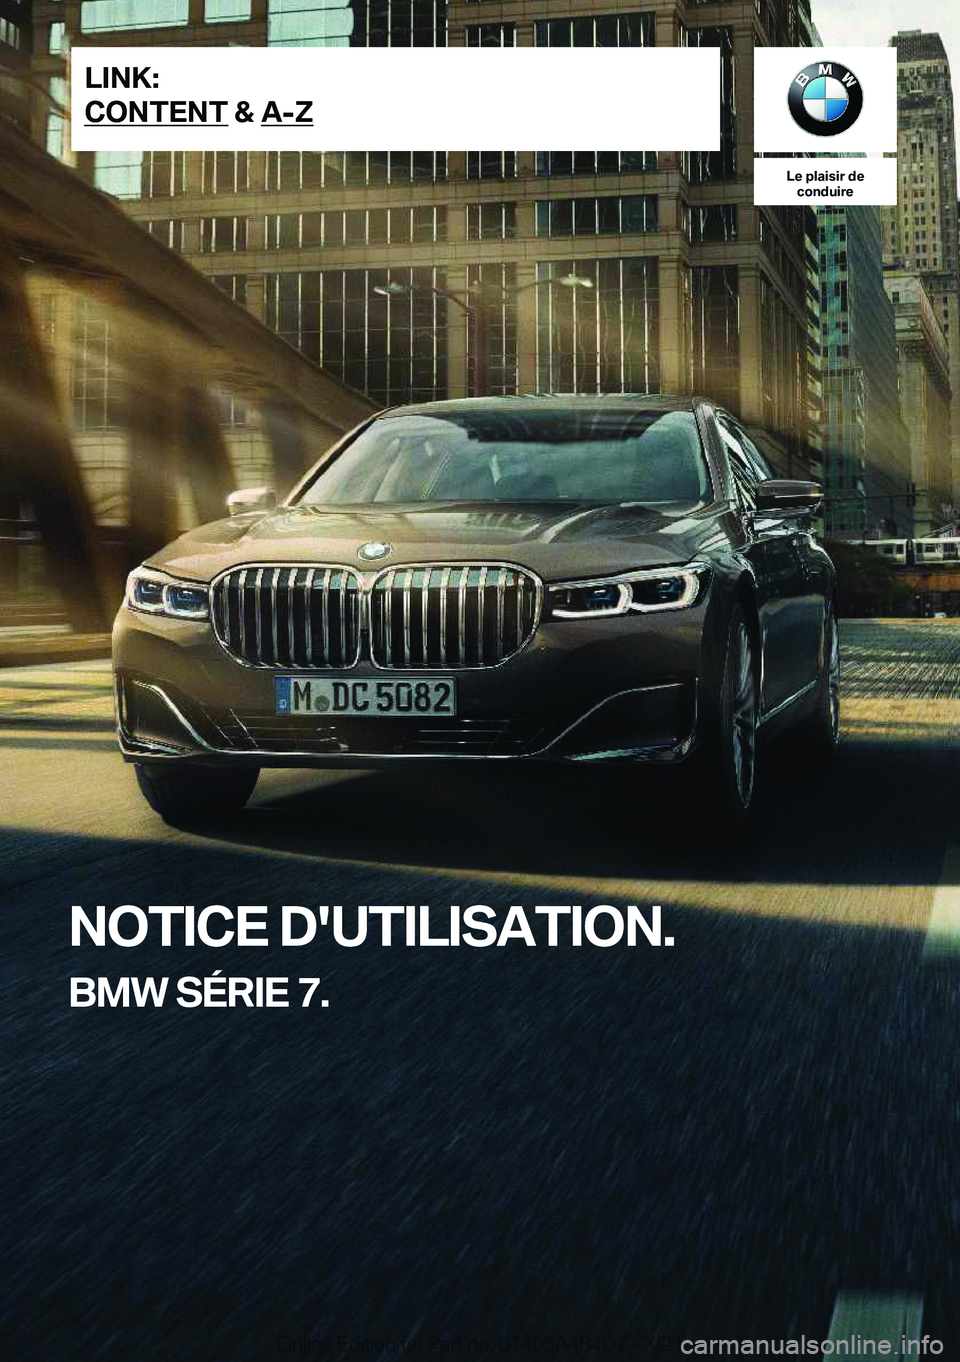 BMW 7 SERIES 2022  Notices Demploi (in French) �L�e��p�l�a�i�s�i�r��d�e�c�o�n�d�u�i�r�e
�N�O�T�I�C�E��D�'�U�T�I�L�I�S�A�T�I�O�N�.
�B�M�W��S�